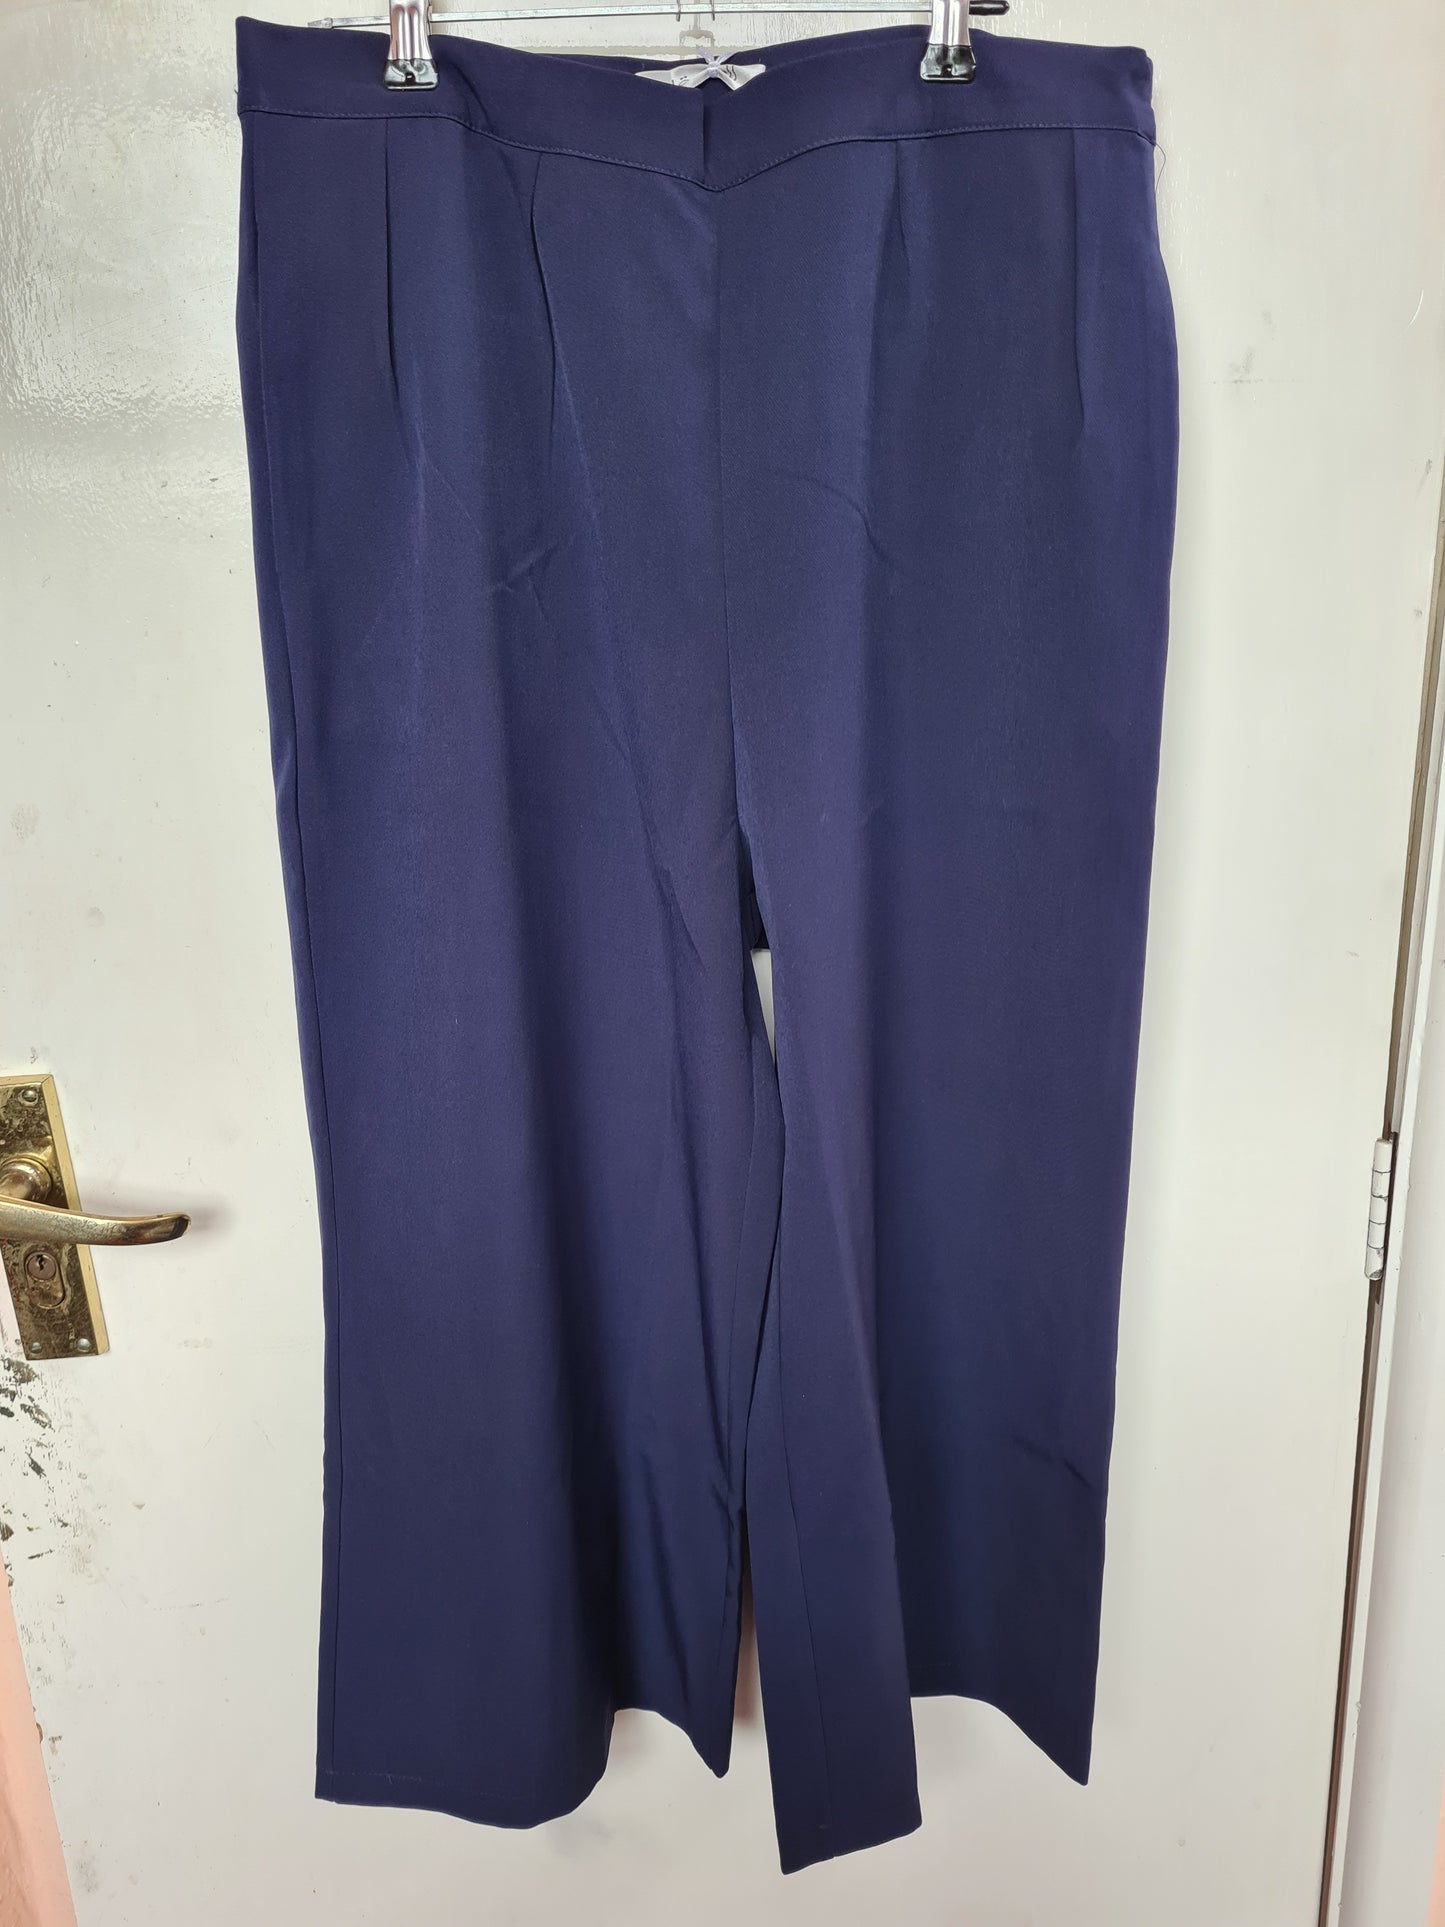 NEW WITH TAGS Jowell Navy in hand culottes size large FREE POSTAGE ✅️